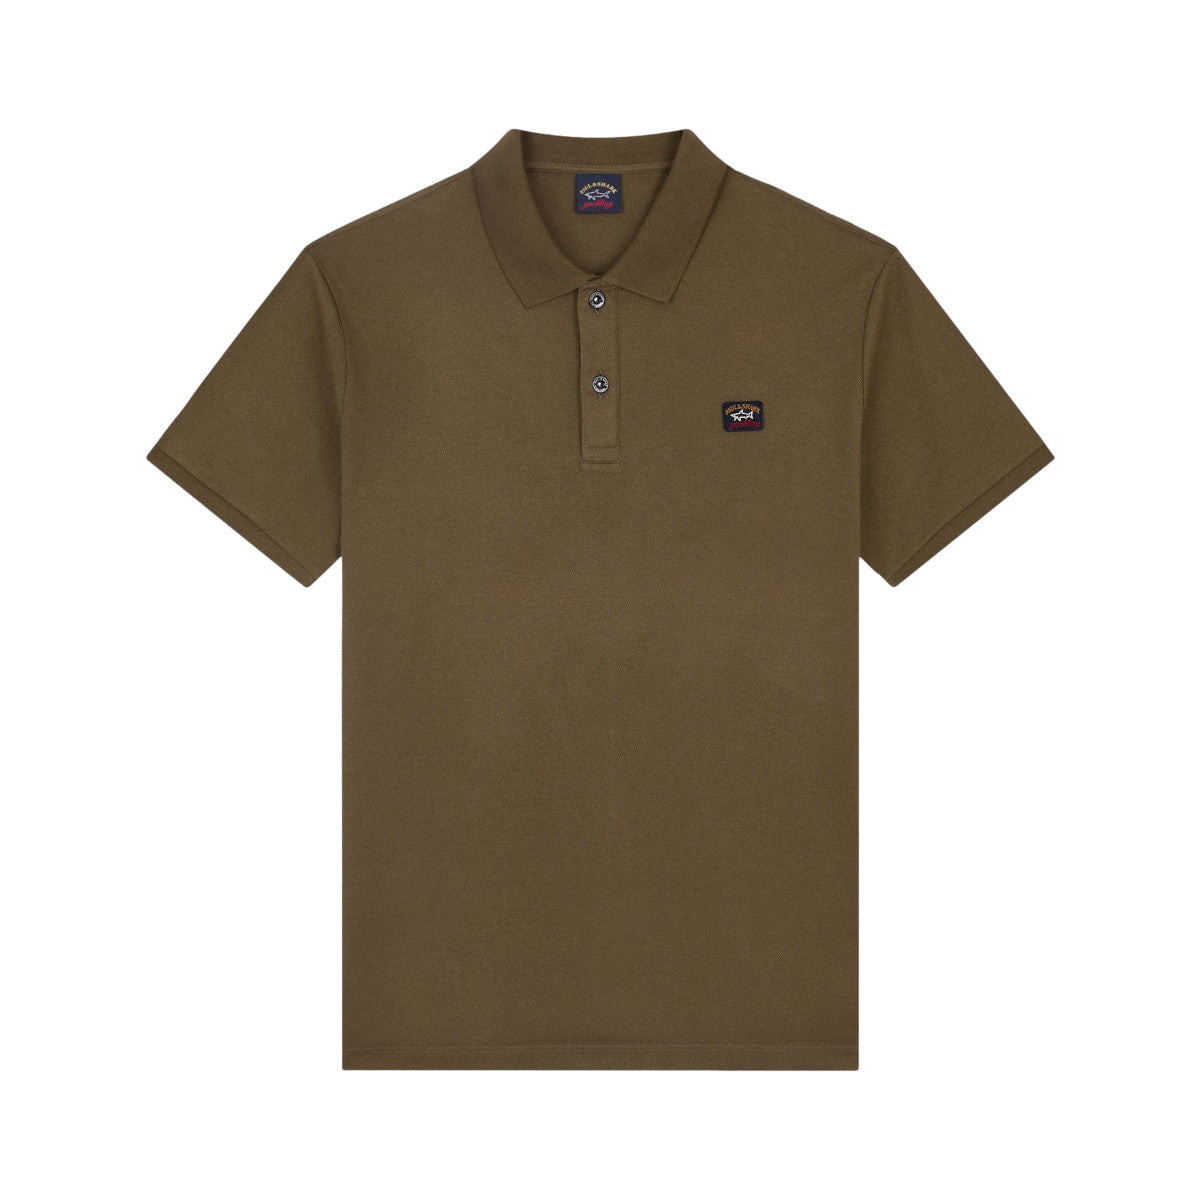 Paul & Shark SS Pique Iconic Badge Polo 132 Military Green